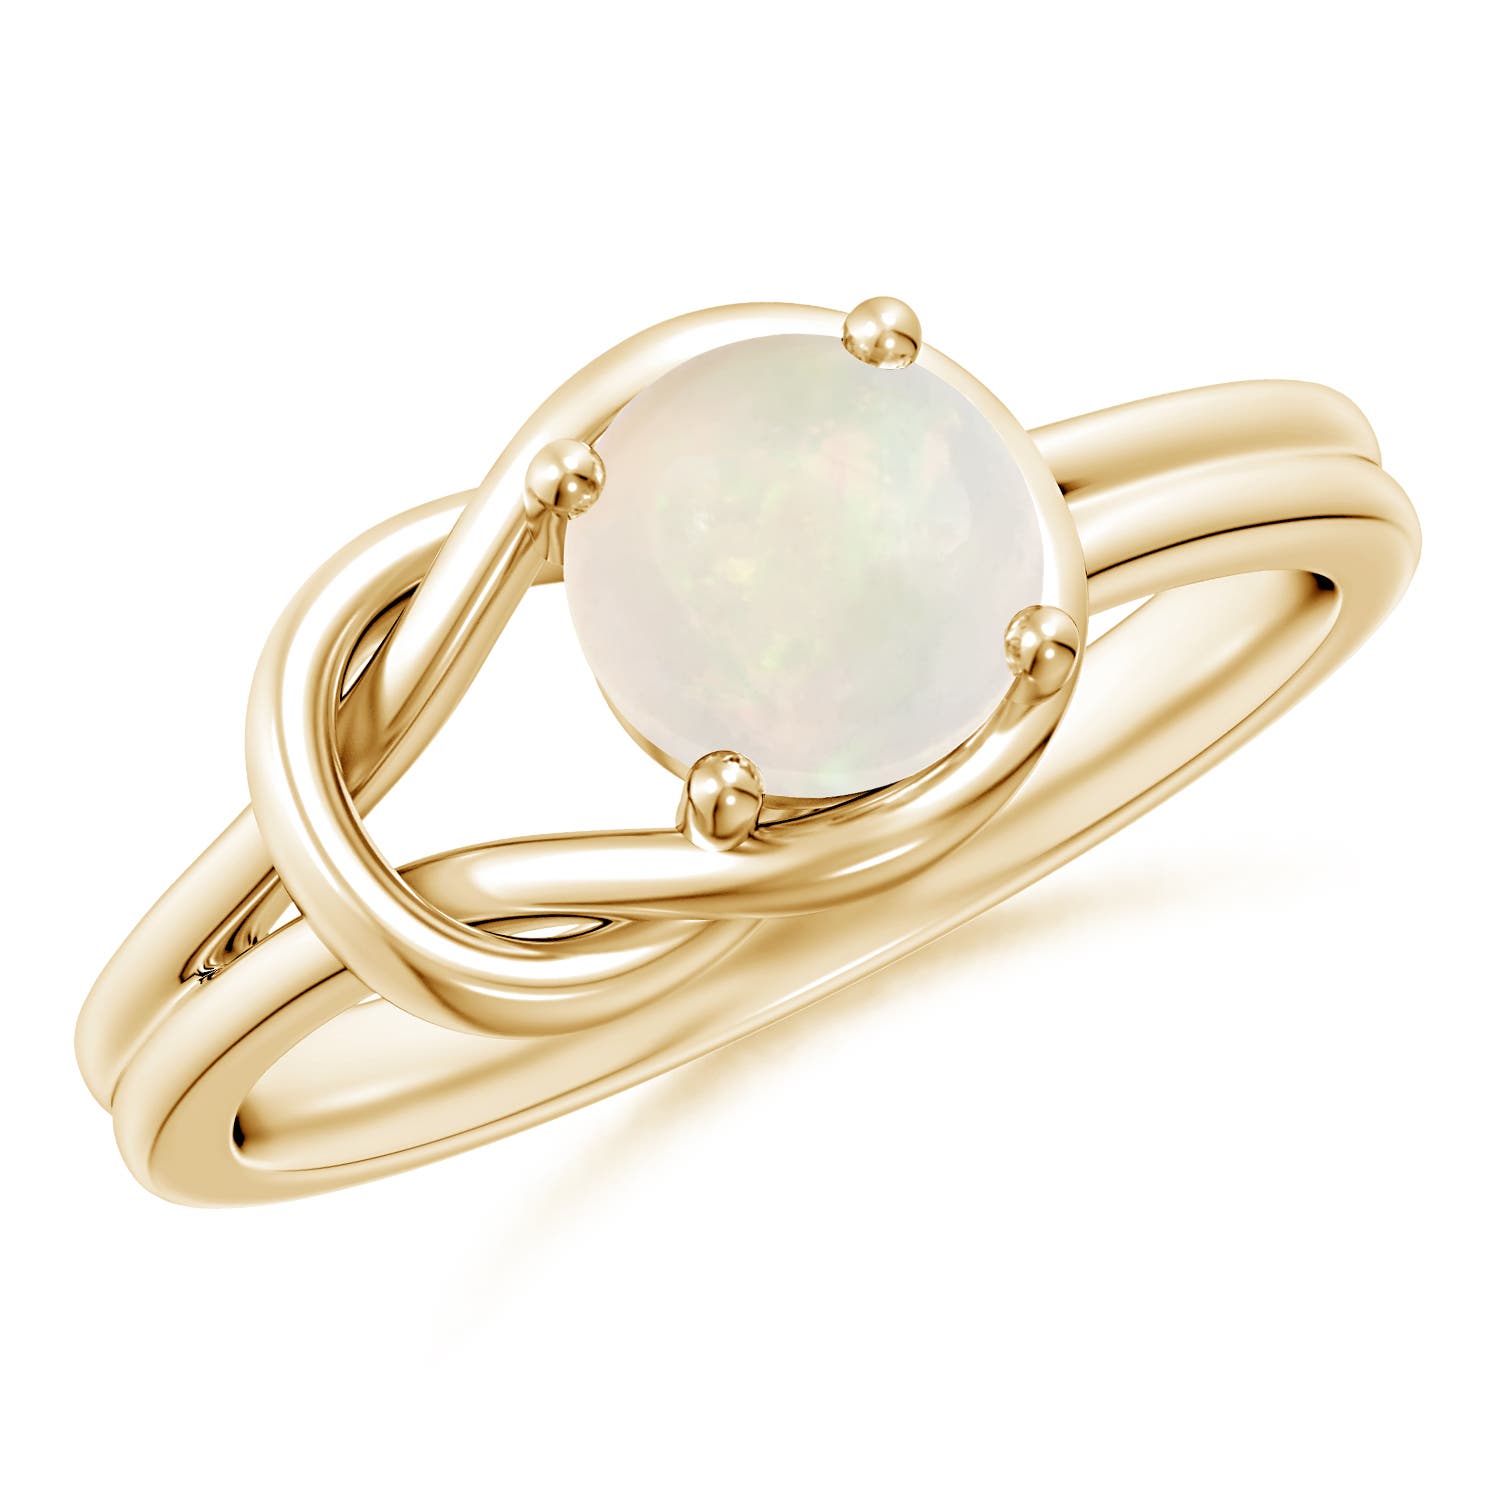 A - Opal / 0.5 CT / 14 KT Yellow Gold